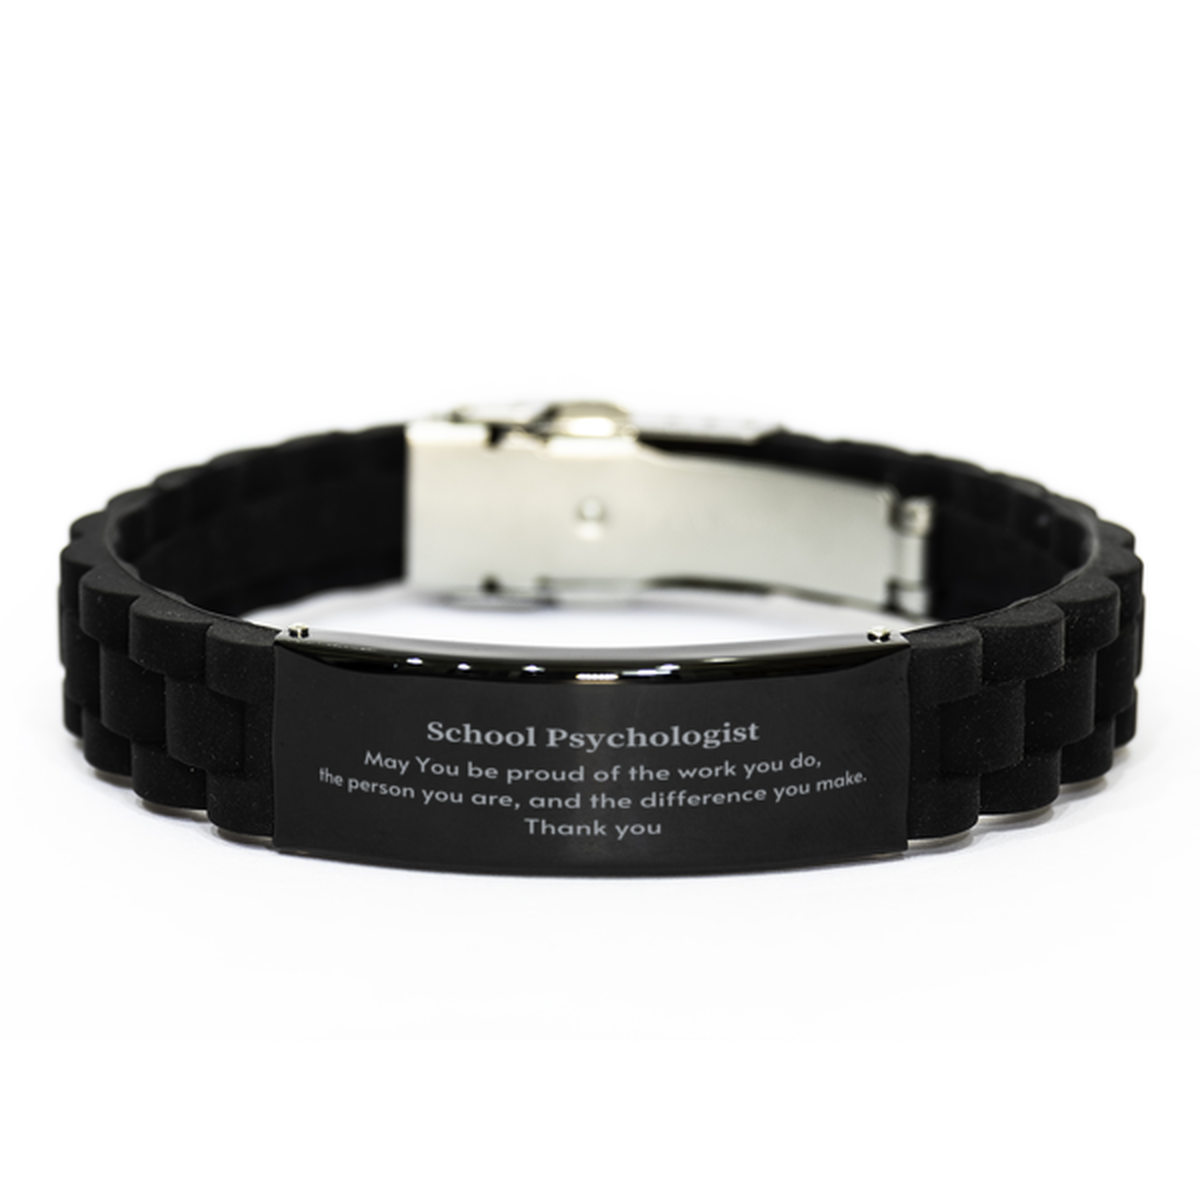 Heartwarming Black Glidelock Clasp Bracelet Retirement Coworkers Gifts for School Psychologist, School Psychologist May You be proud of the work you do, the person you are Gifts for Boss Men Women Friends